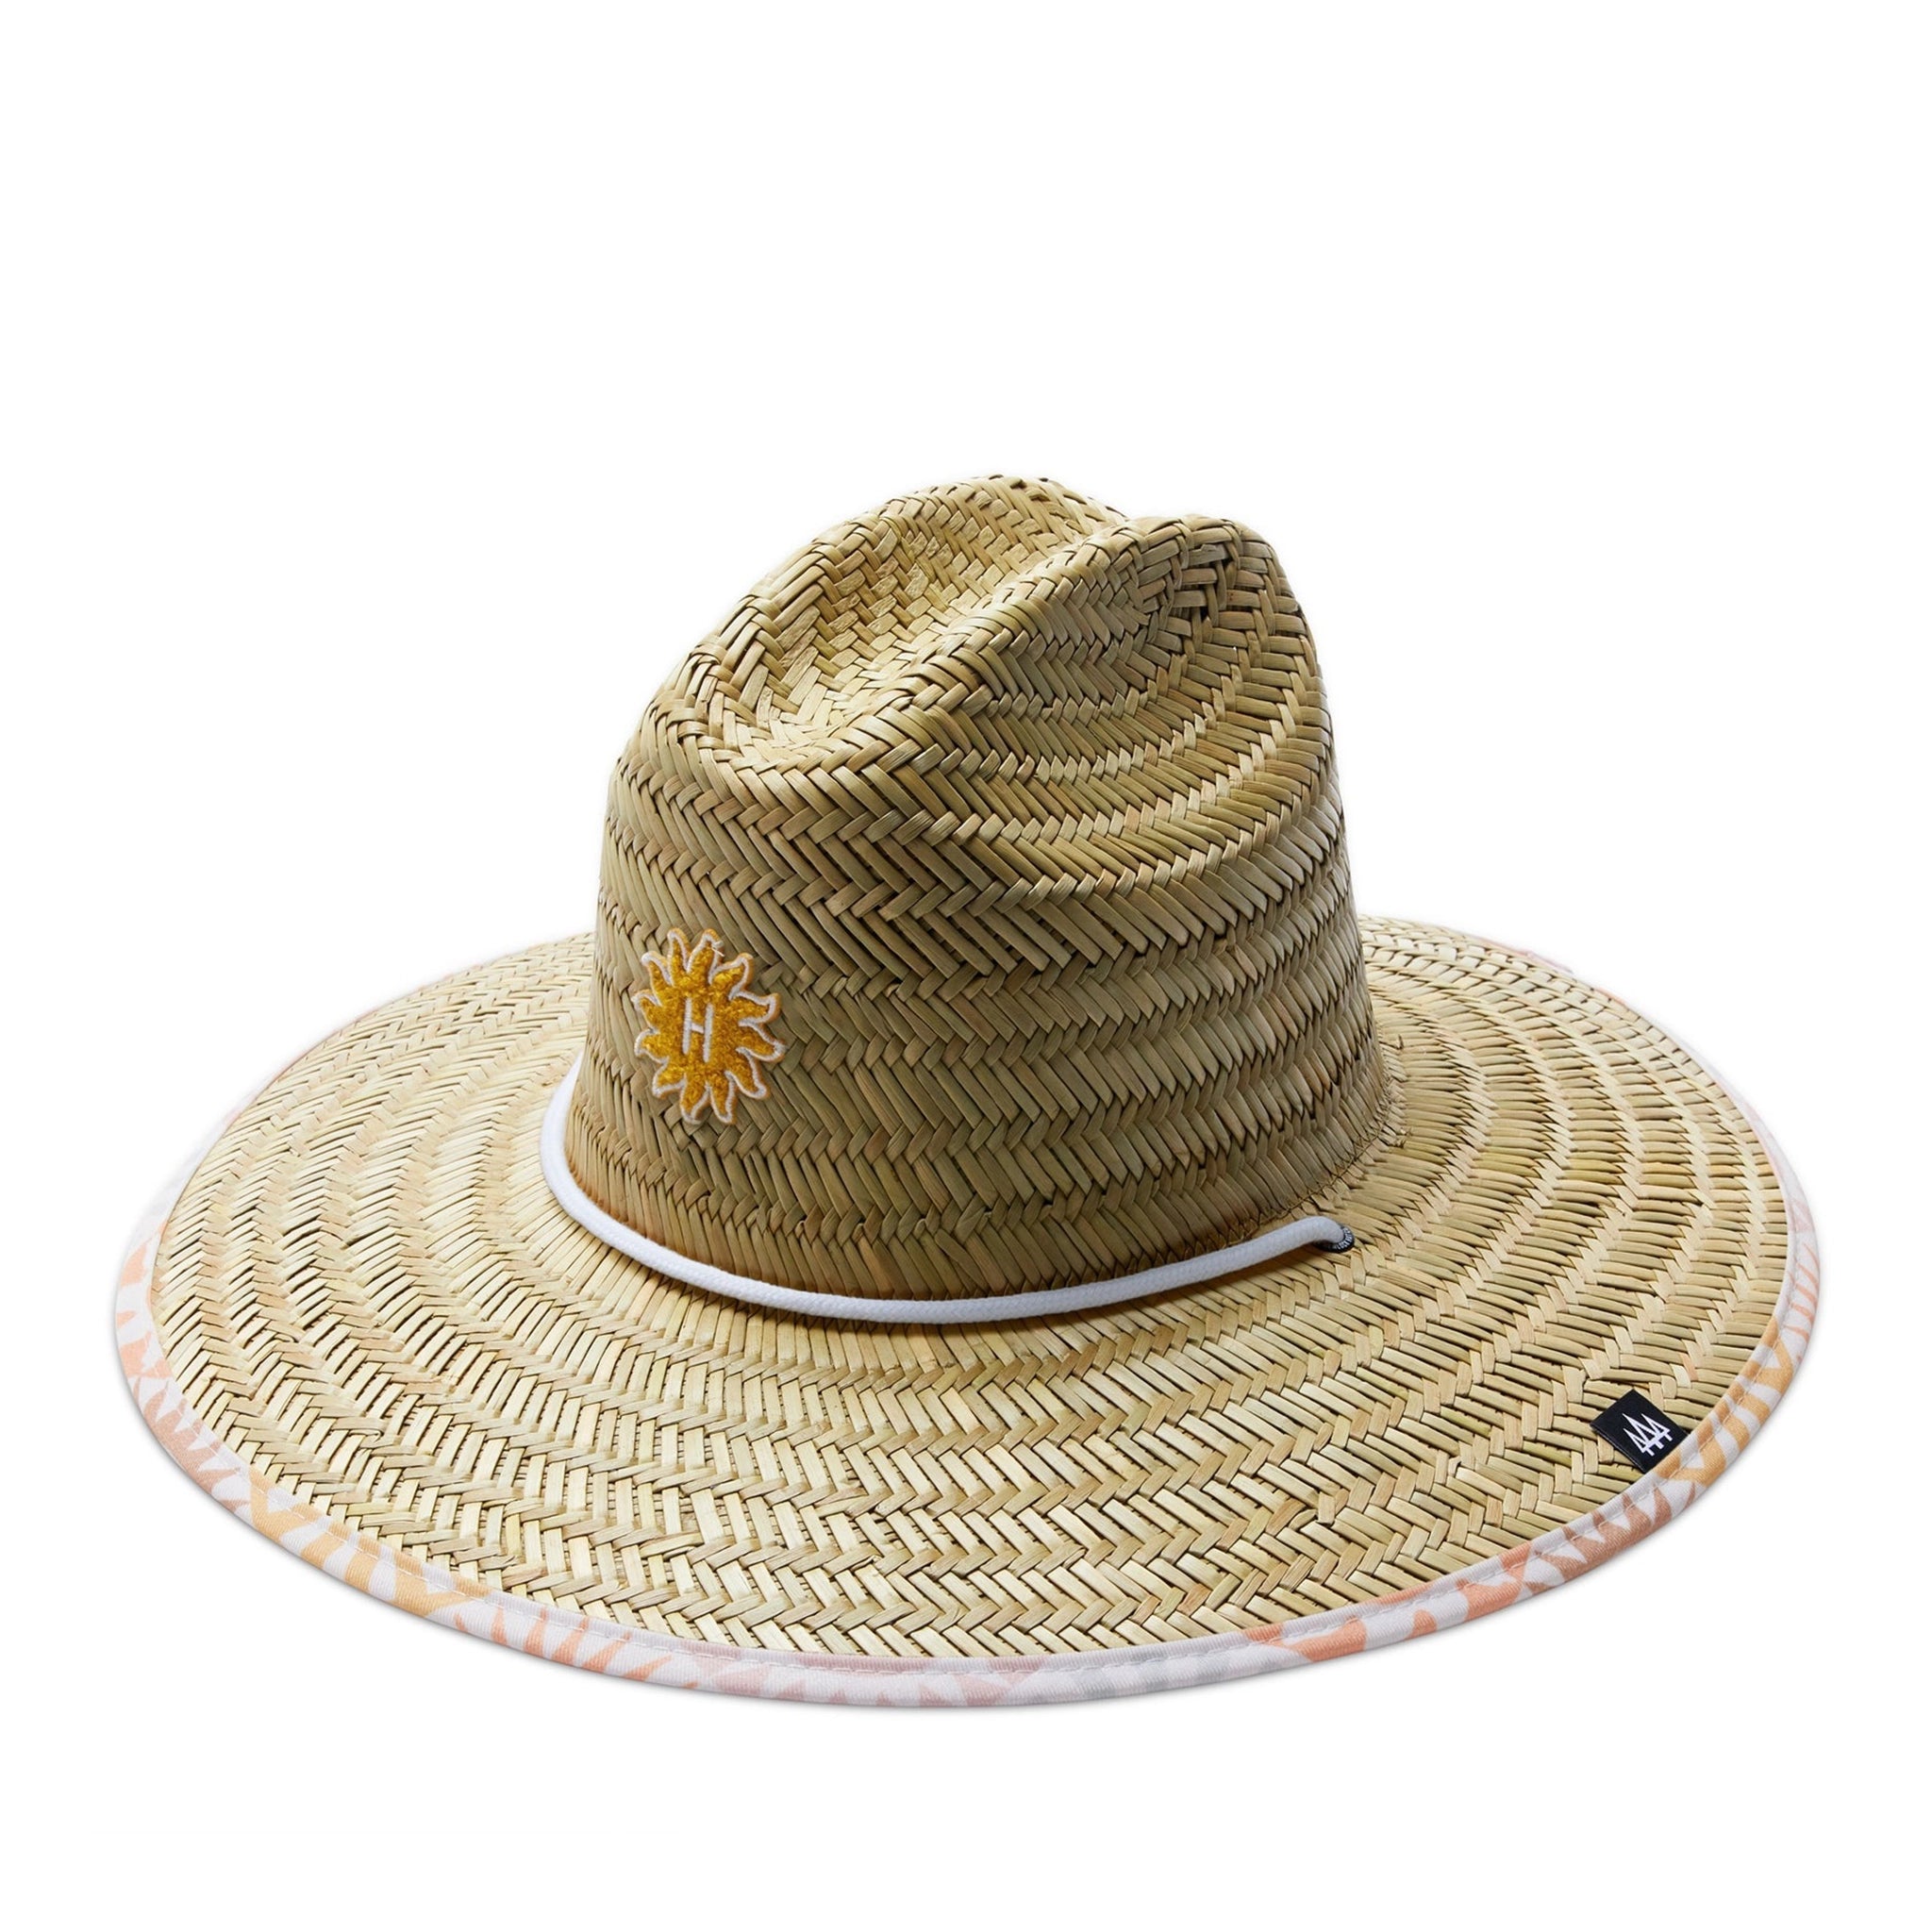 On a white background is a neutral colored straw sun hat with a neckstrap and a light pink and light orange sun design on the underside of the brim.